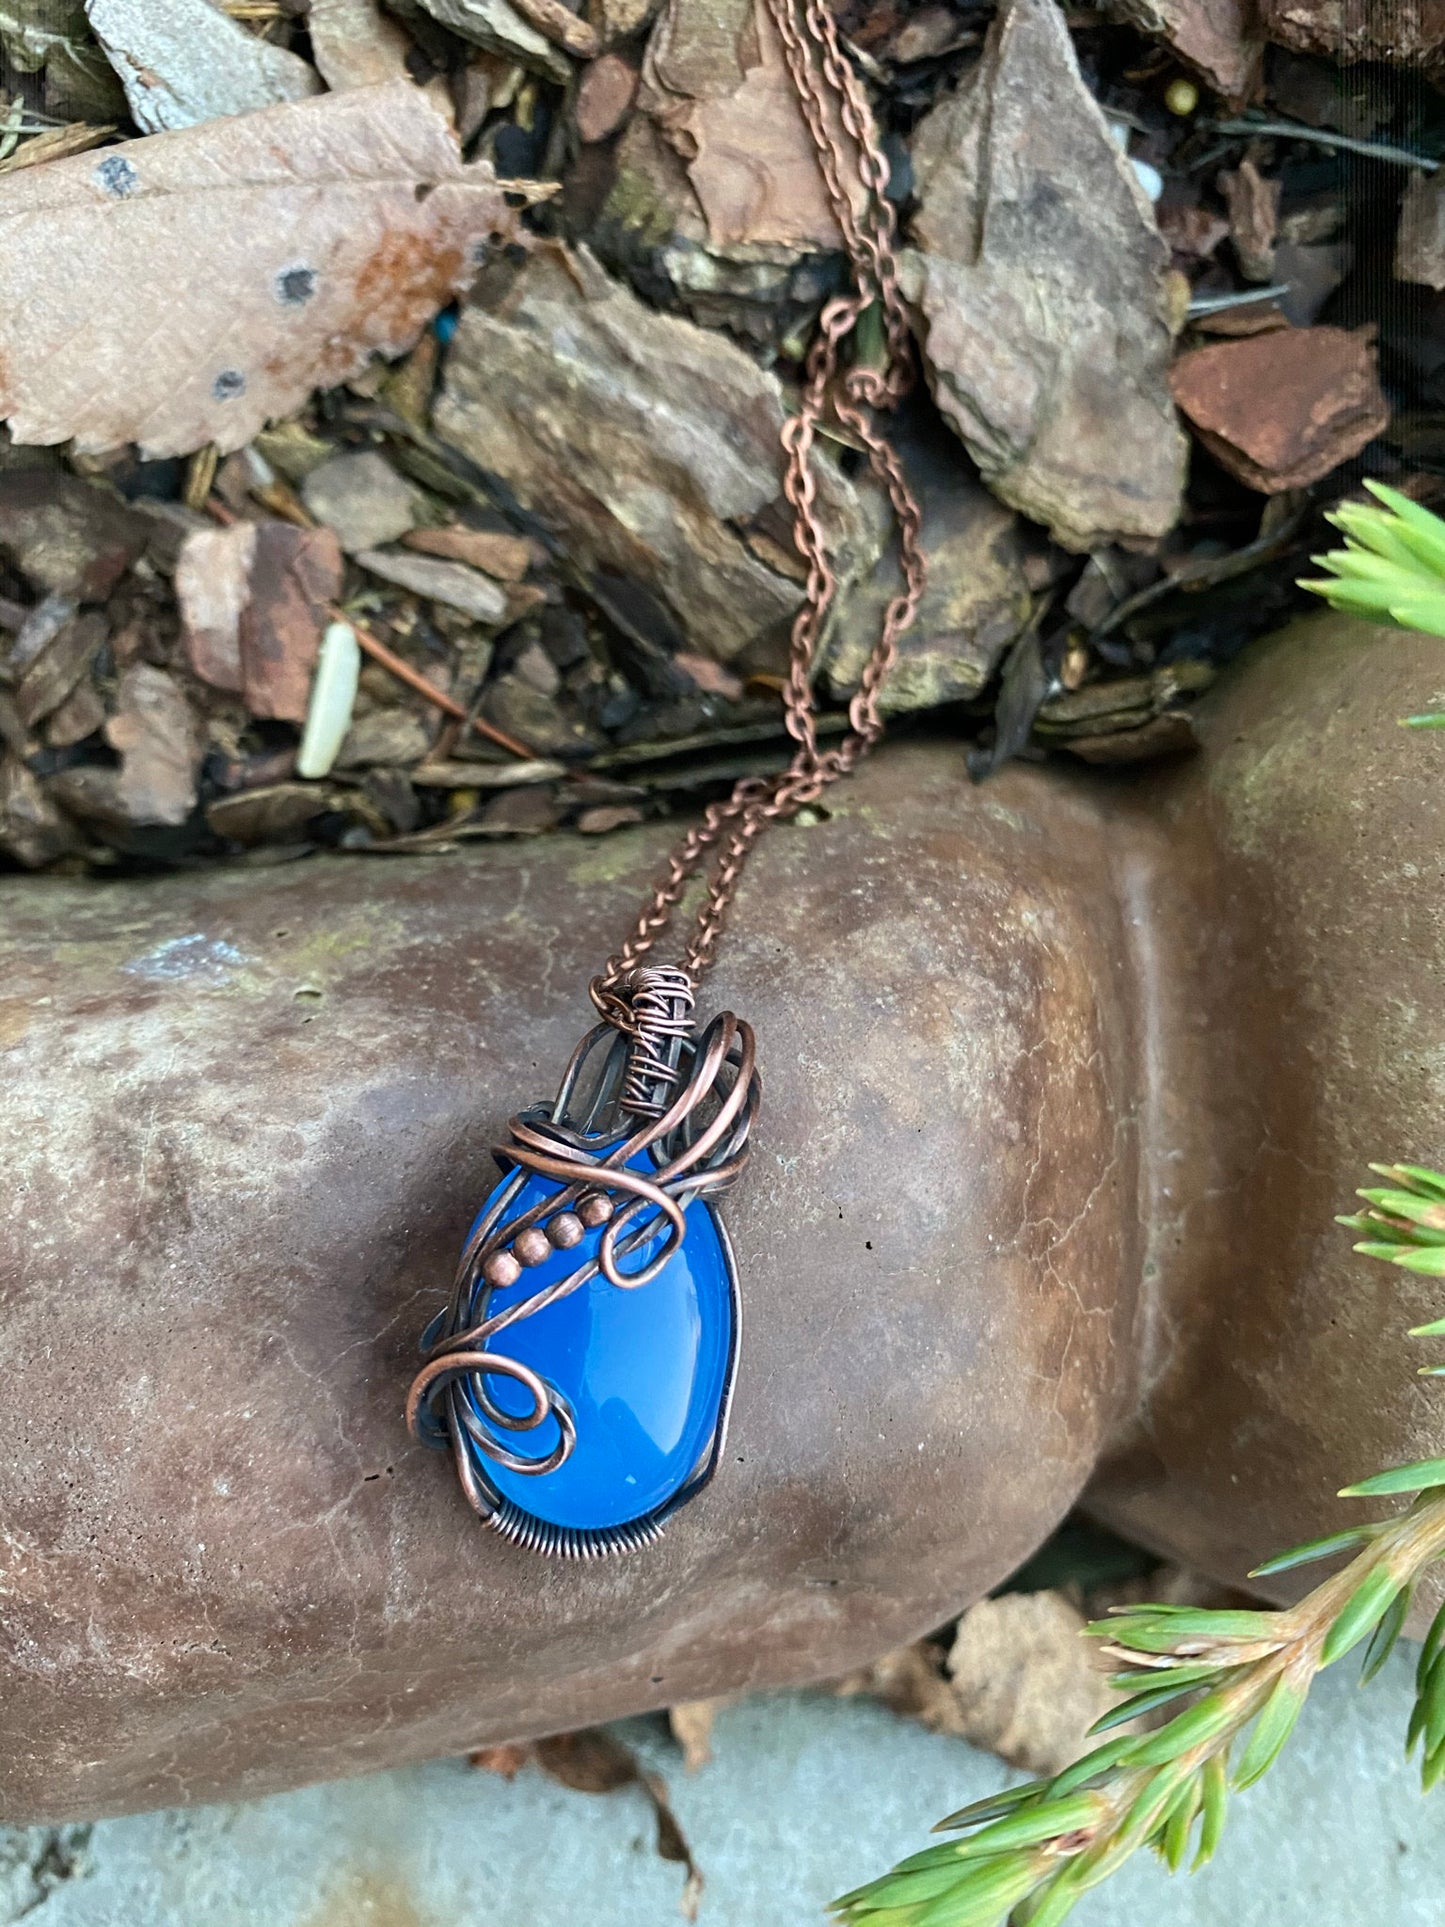 Oval Blue Chalcedony Stone, Wire Wrapped Pendant Necklace